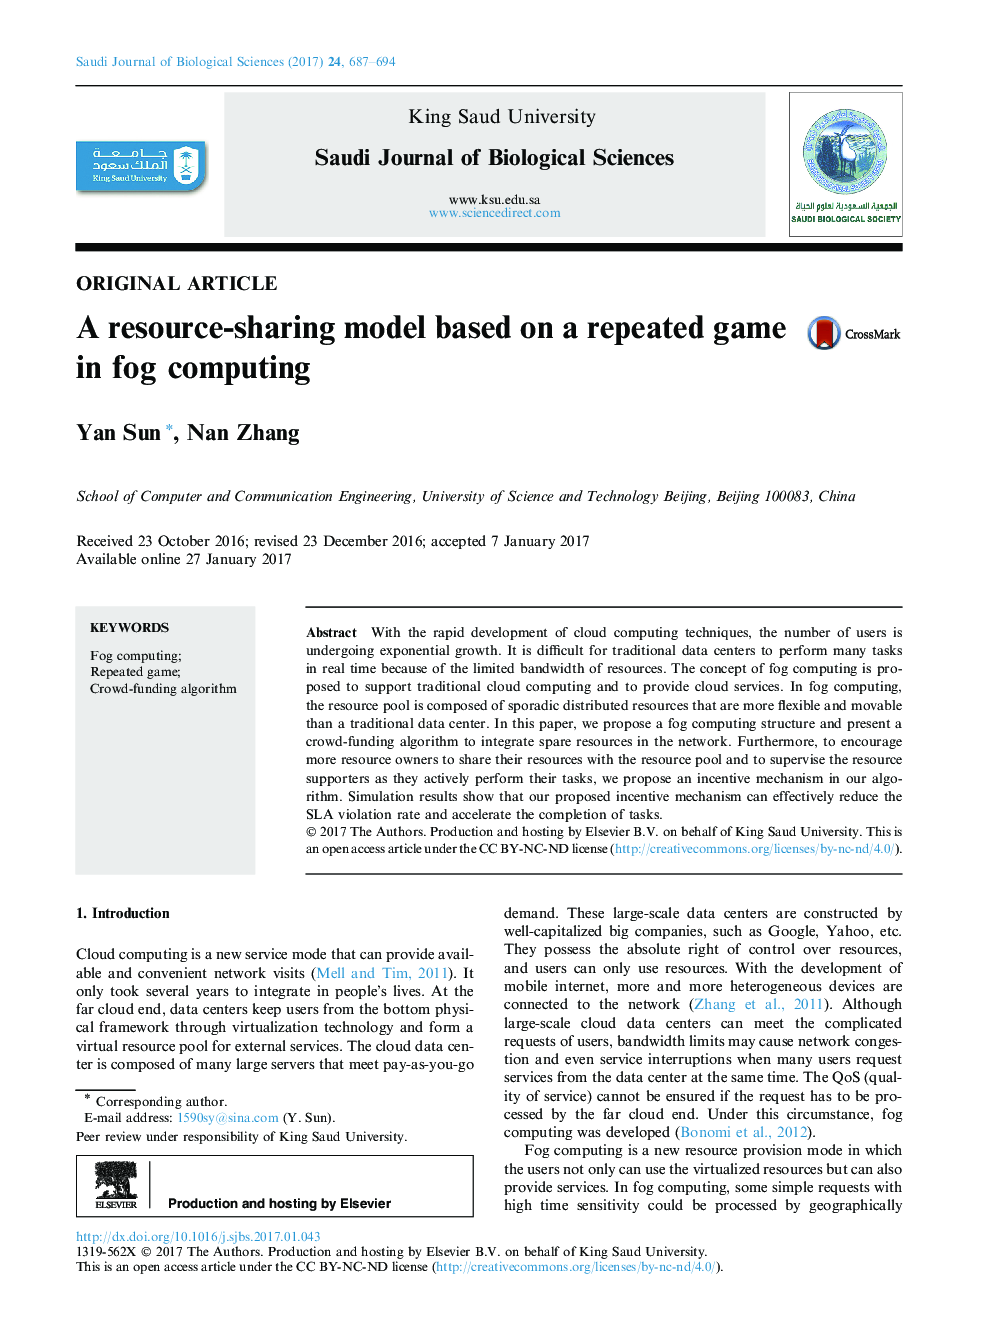 A resource-sharing model based on a repeated game in fog computing